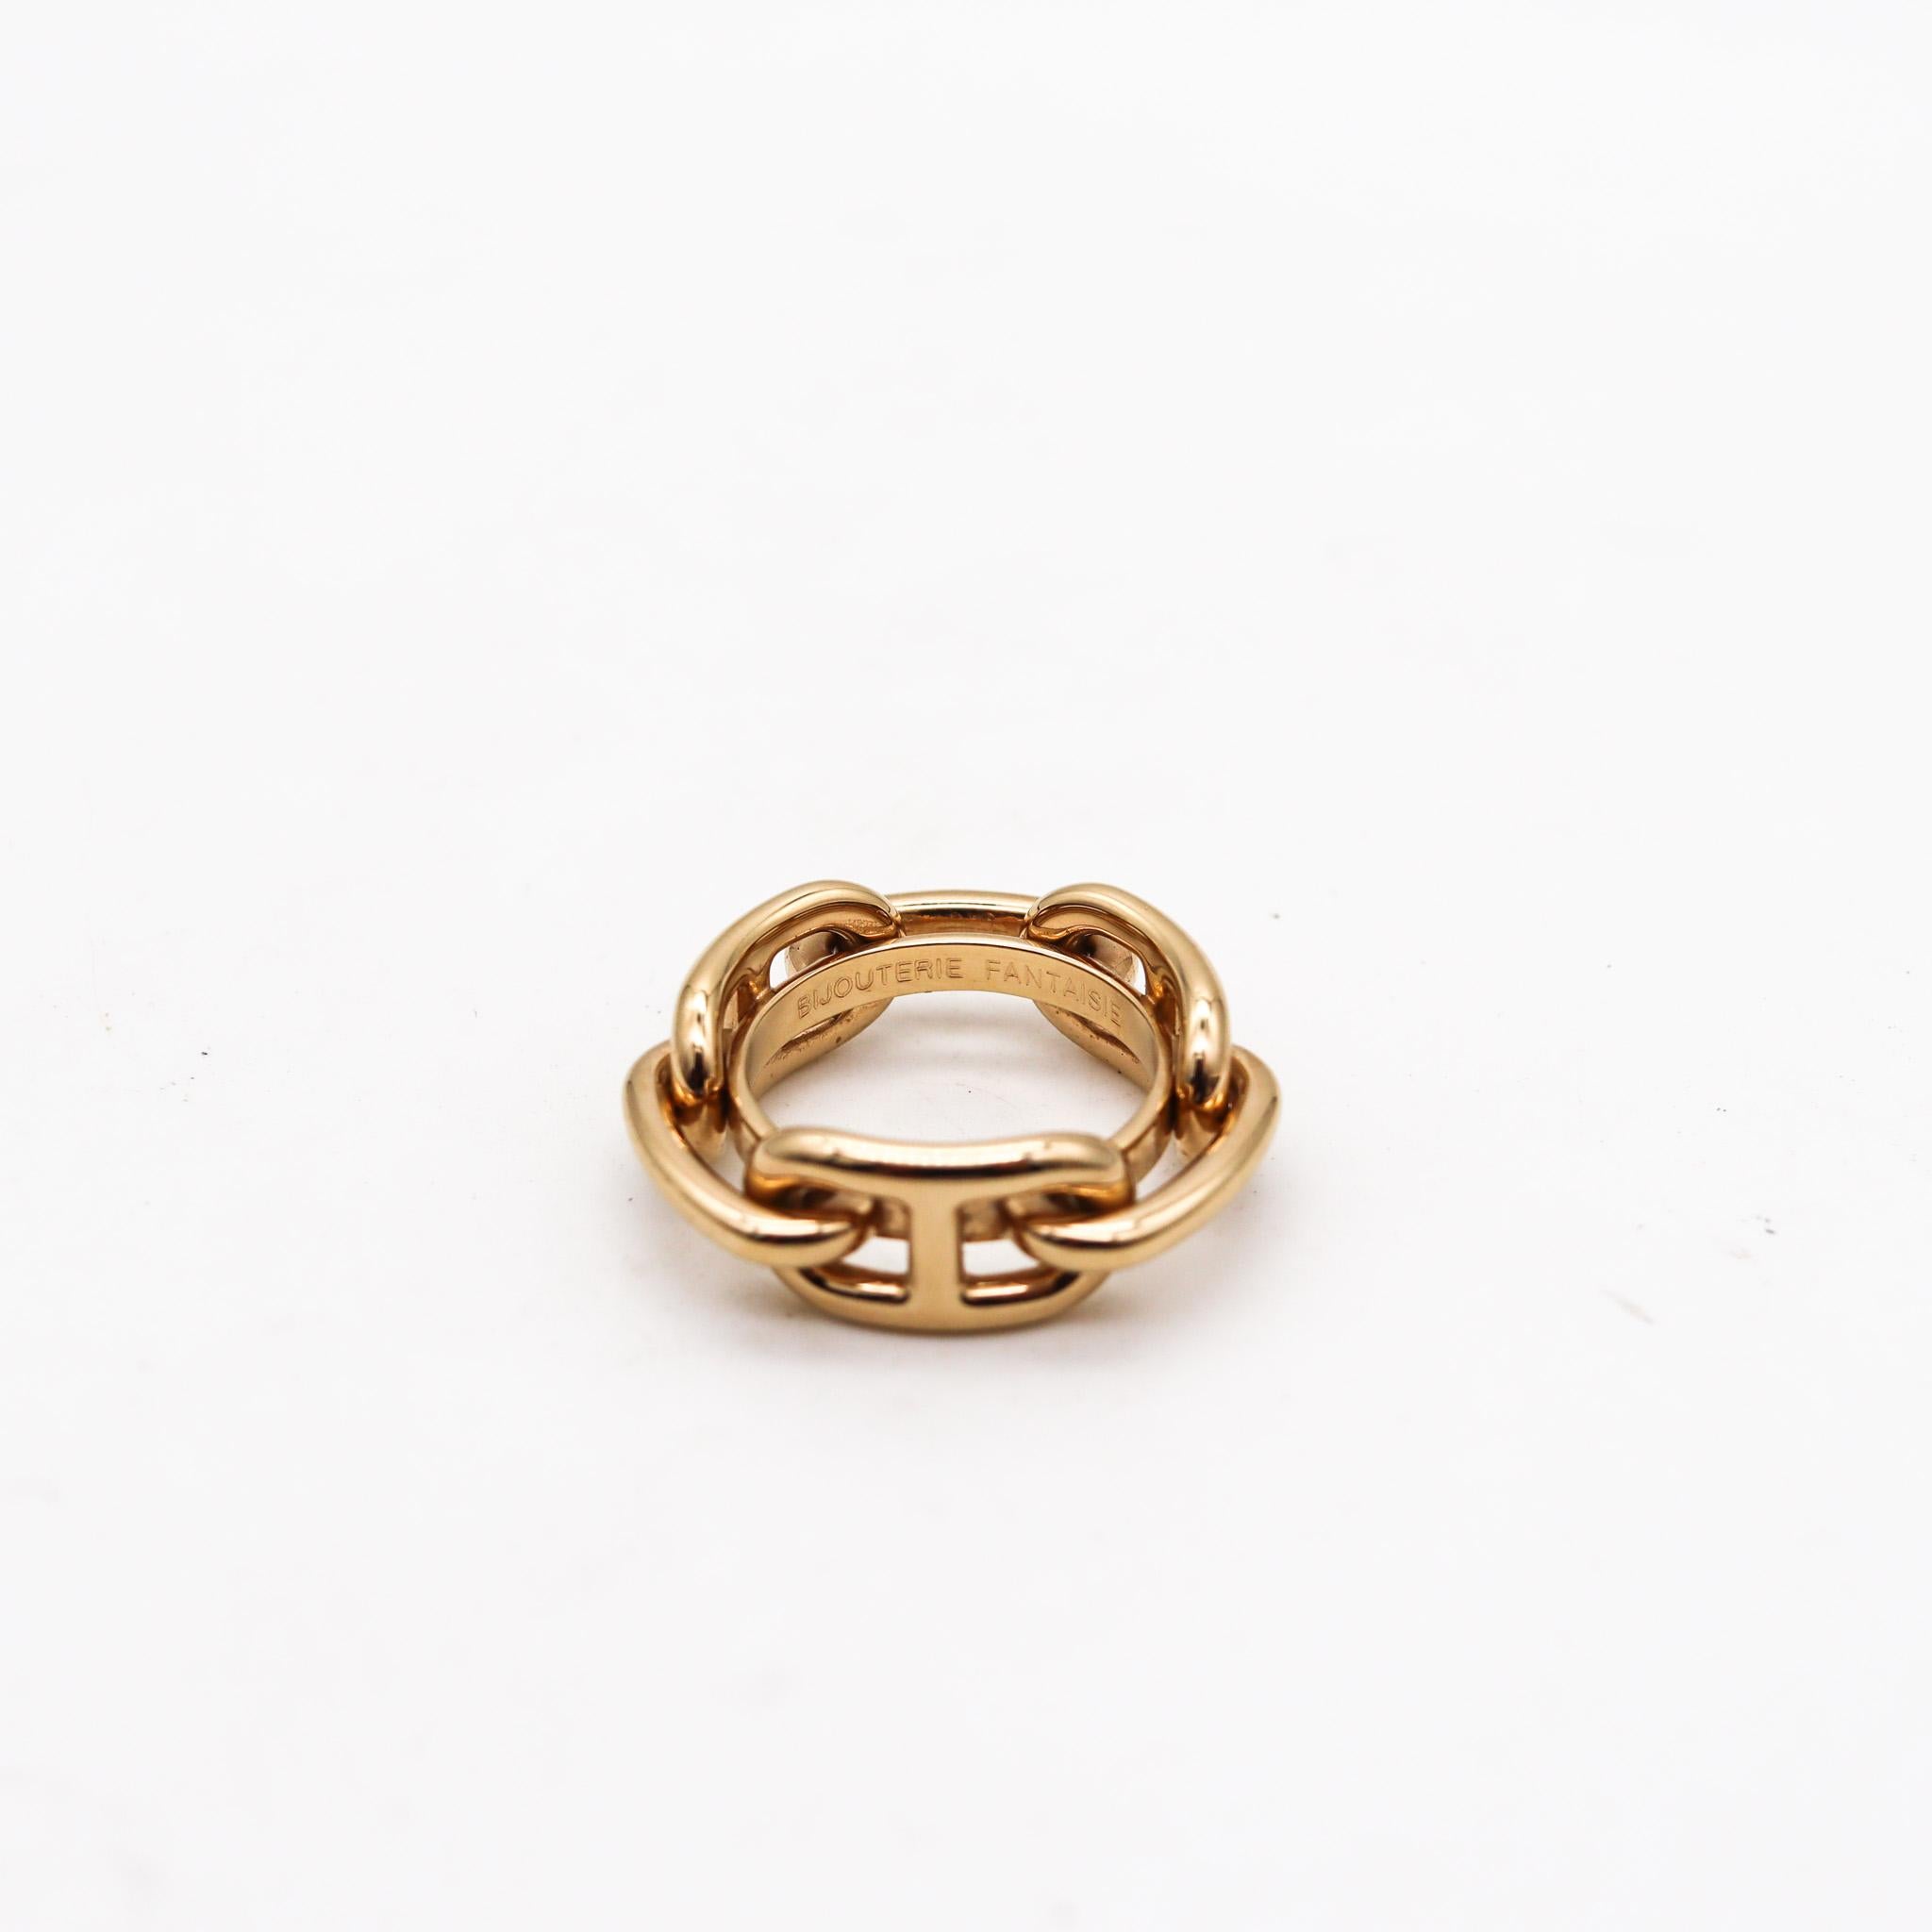  Hermes Paris Vintage Chain D'Ancre Scarf Ring In 18Kt Yellow Gold Plated In Box Pour femmes 